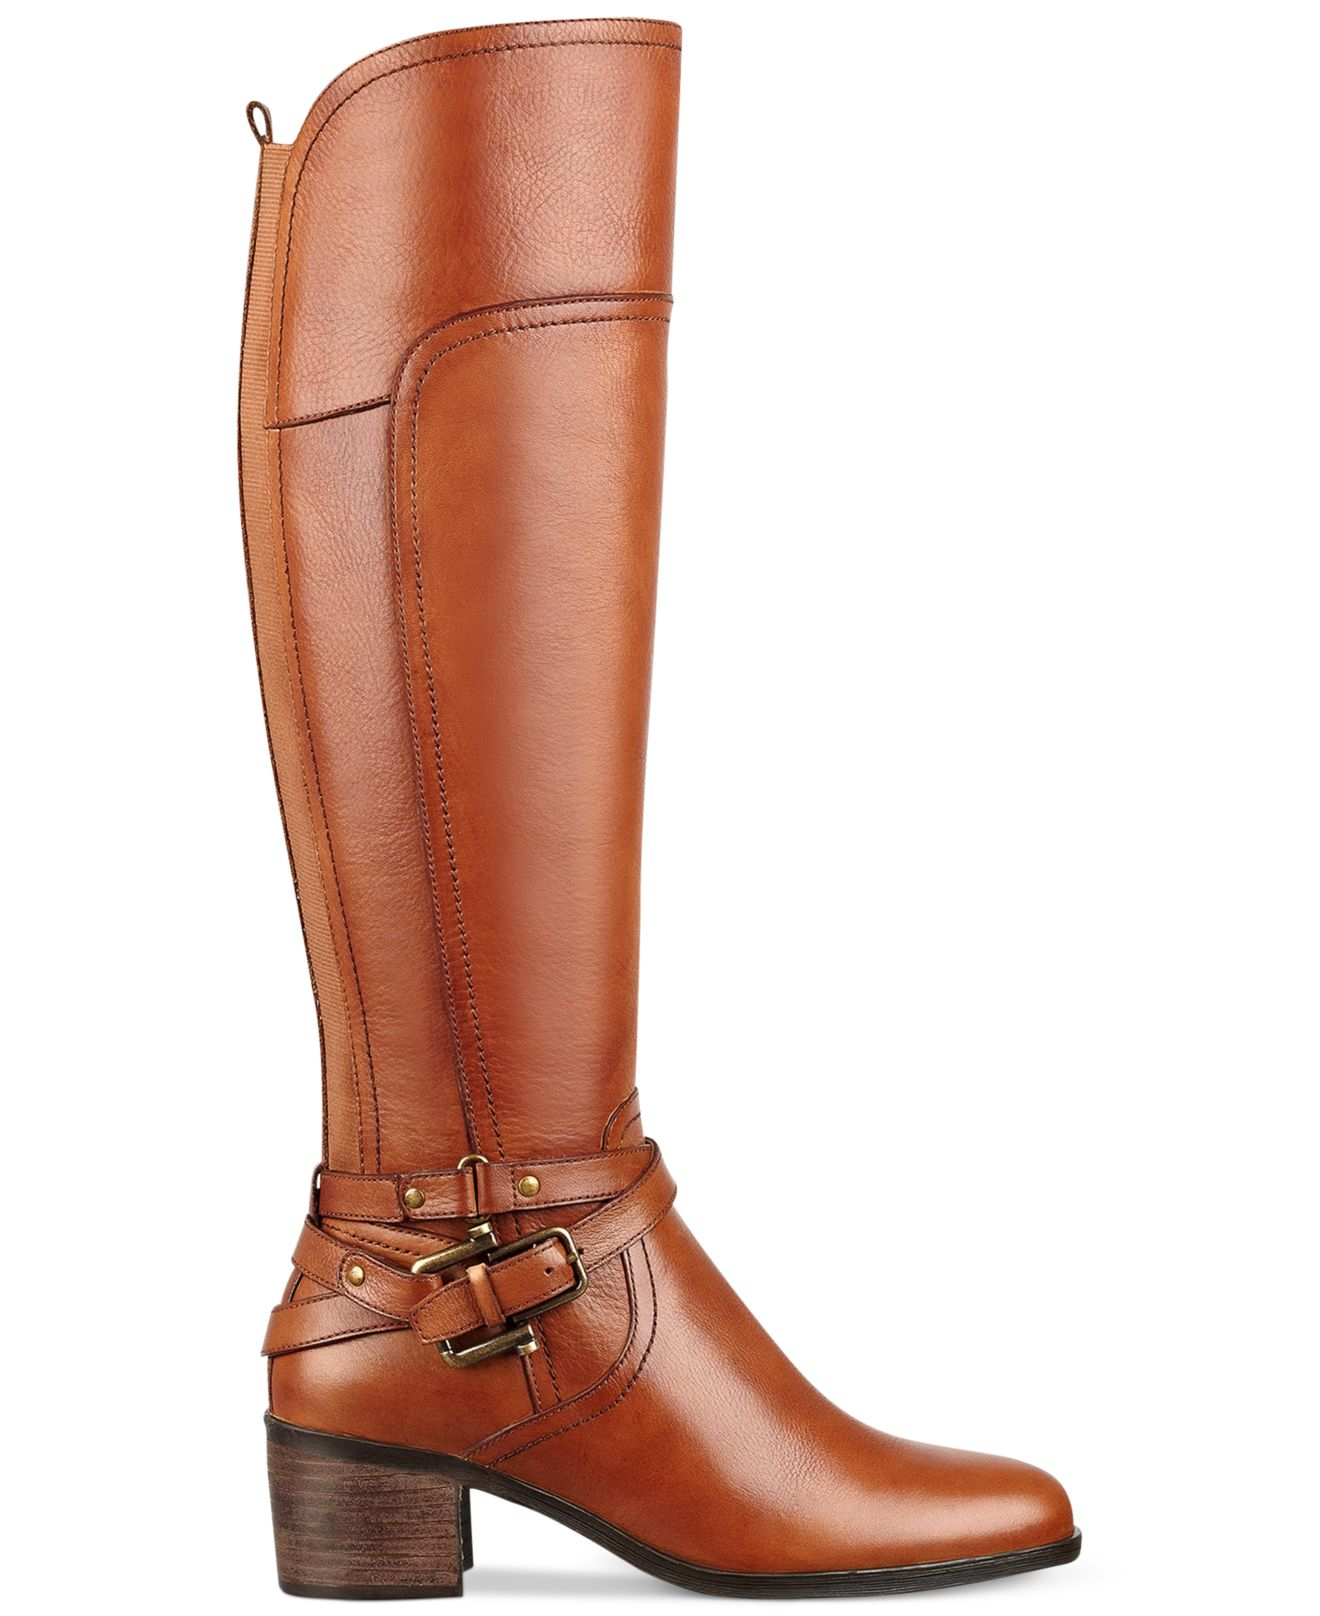 Lyst - Marc Fisher Kacee Tall Wide Calf Riding Boots in Brown